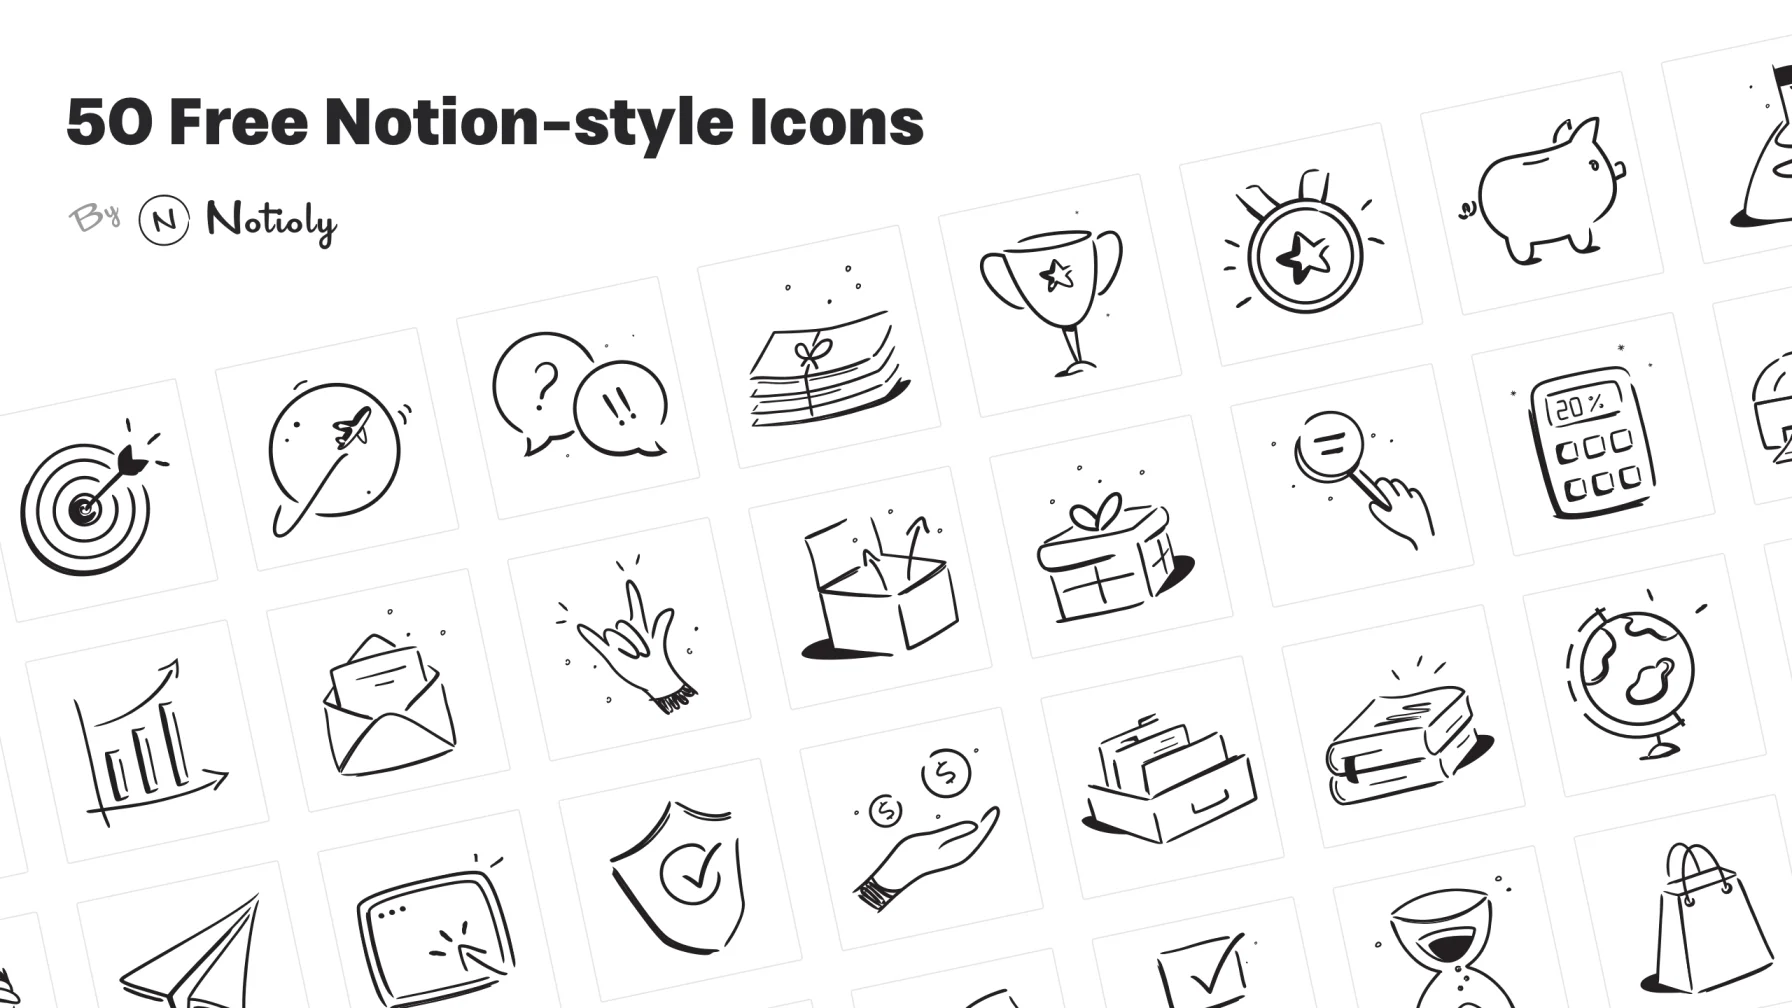 Notion-style Icons